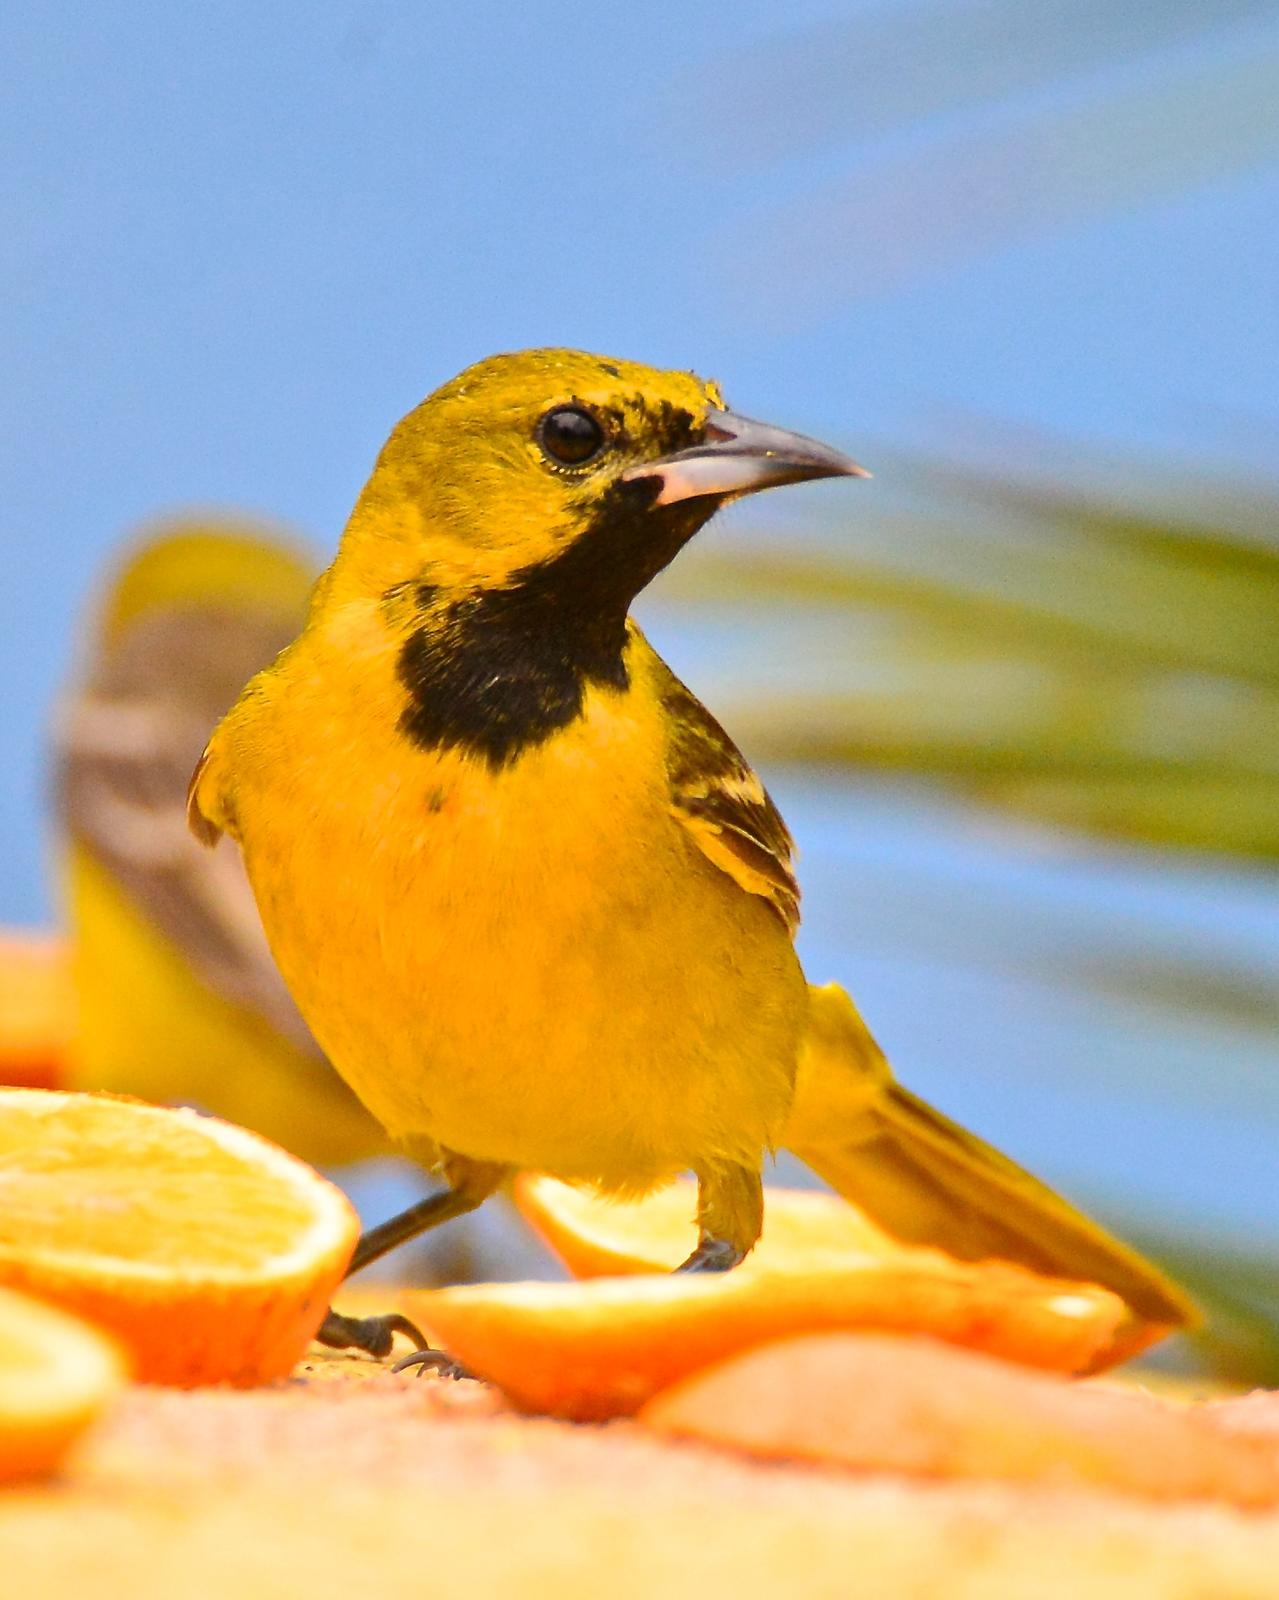 Orchard Oriole Photo by Gerald Friesen